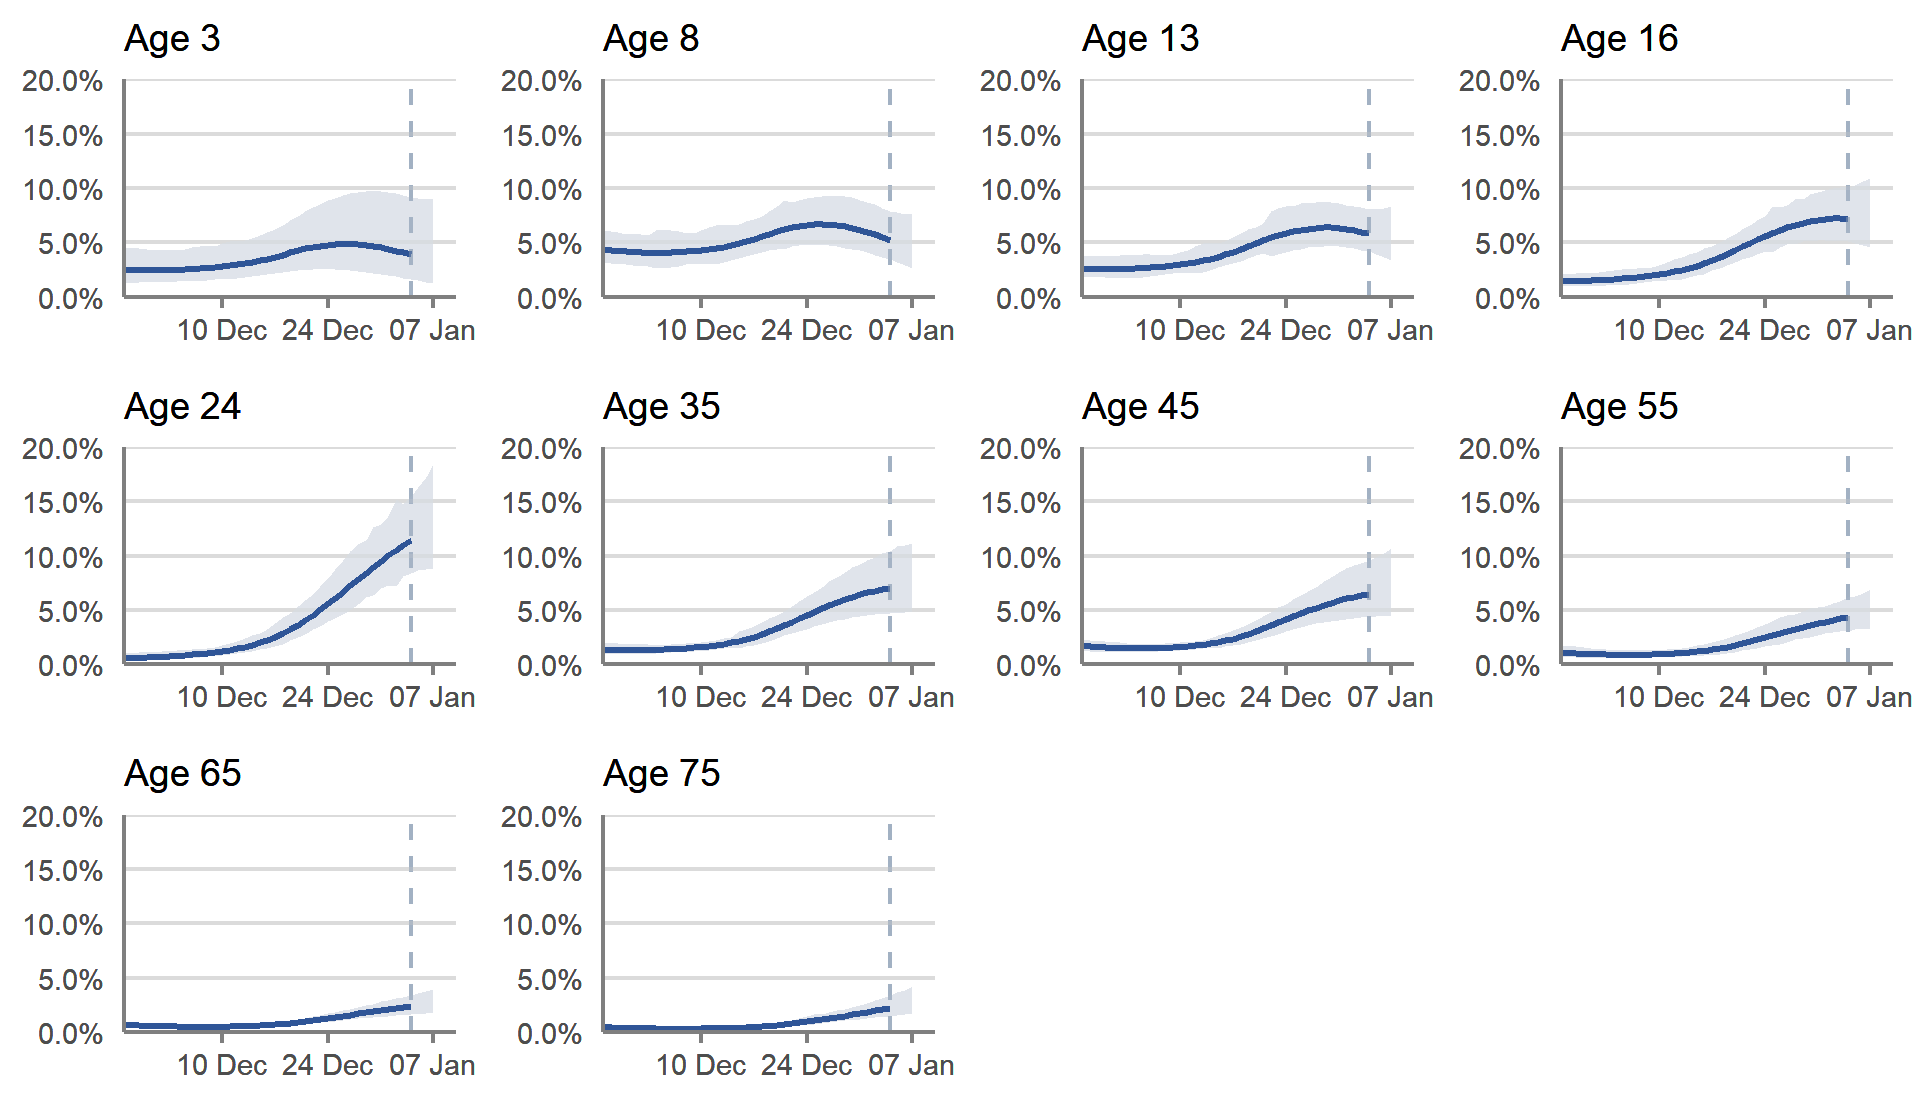 Modelled daily estimates of the percentage of the private residential population in Scotland testing positive for COVID-19, by reference age, between 20 November and 31 December 2021, including 95% confidence intervals (see notes 2,5,6,8)   In Scotland, the percentage of people testing positive for COVID-19 has increased in young and older adults in the most recent few weeks. The trend is uncertain for school age children.